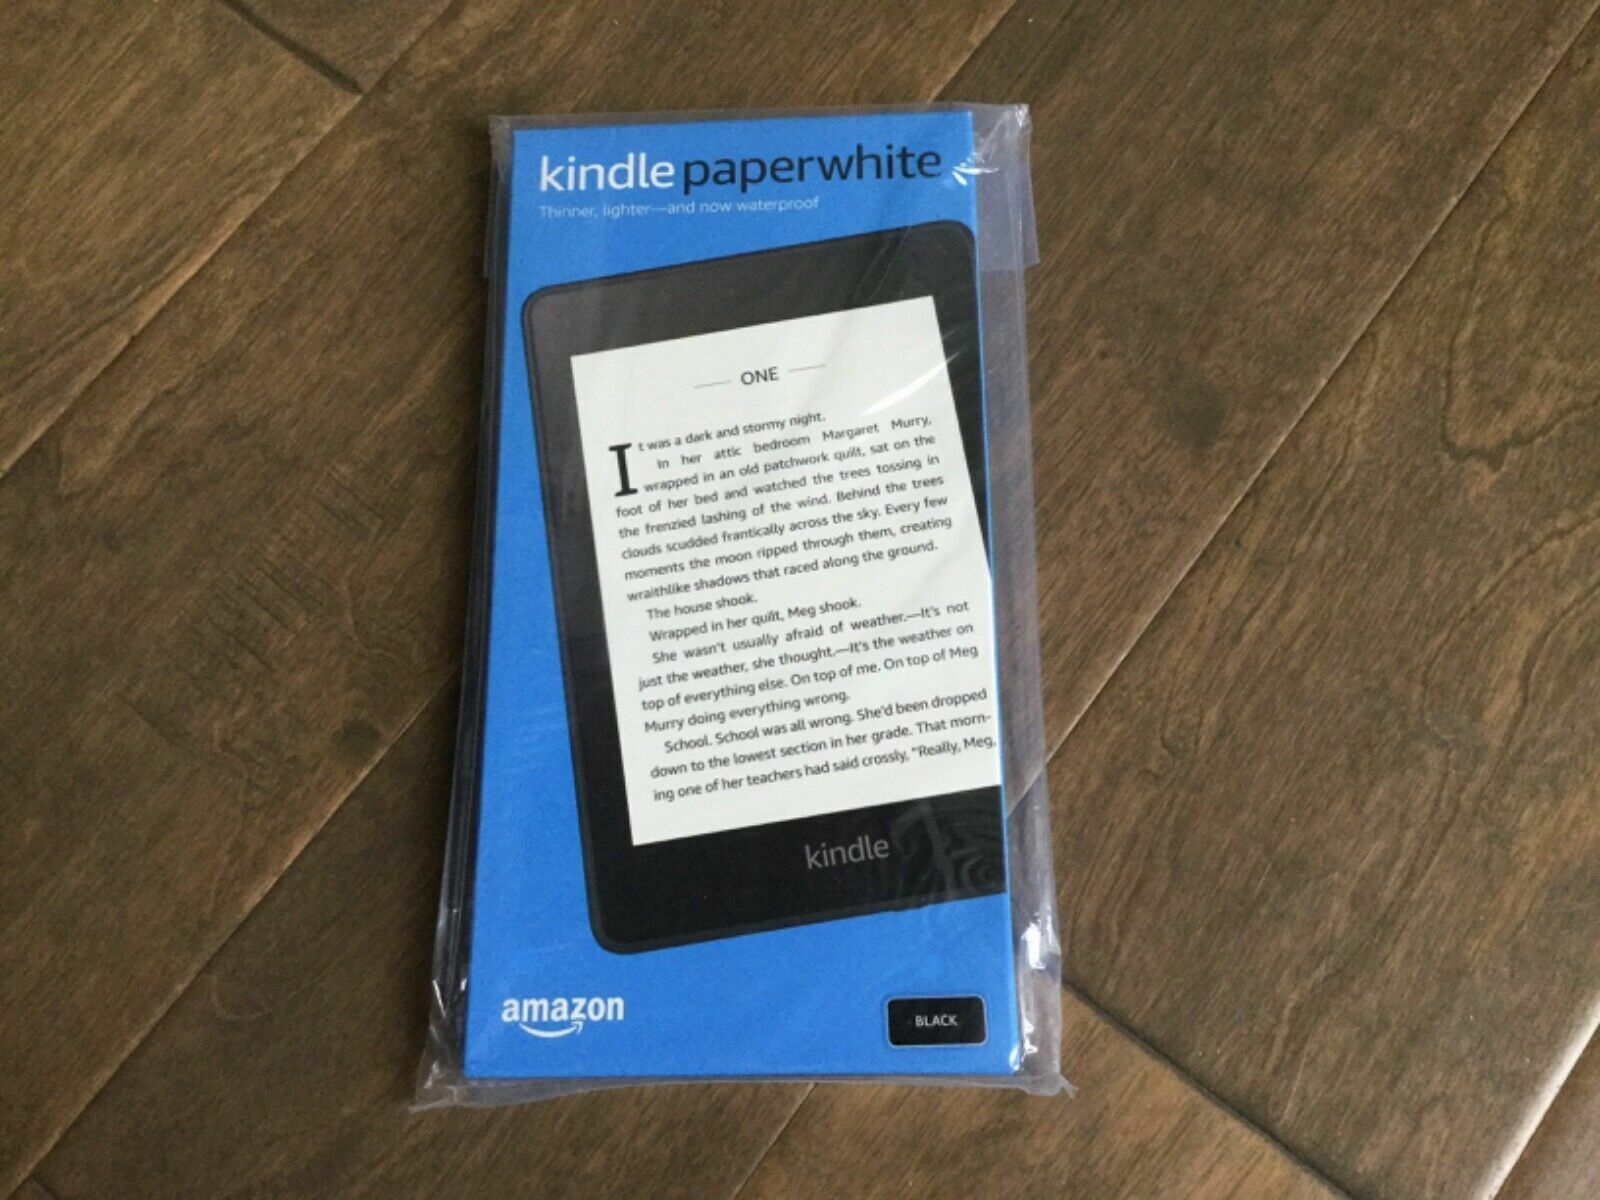 Kindle Paperwhite E-Reader (With Offers) - 6 - 8GB - Black 2018 